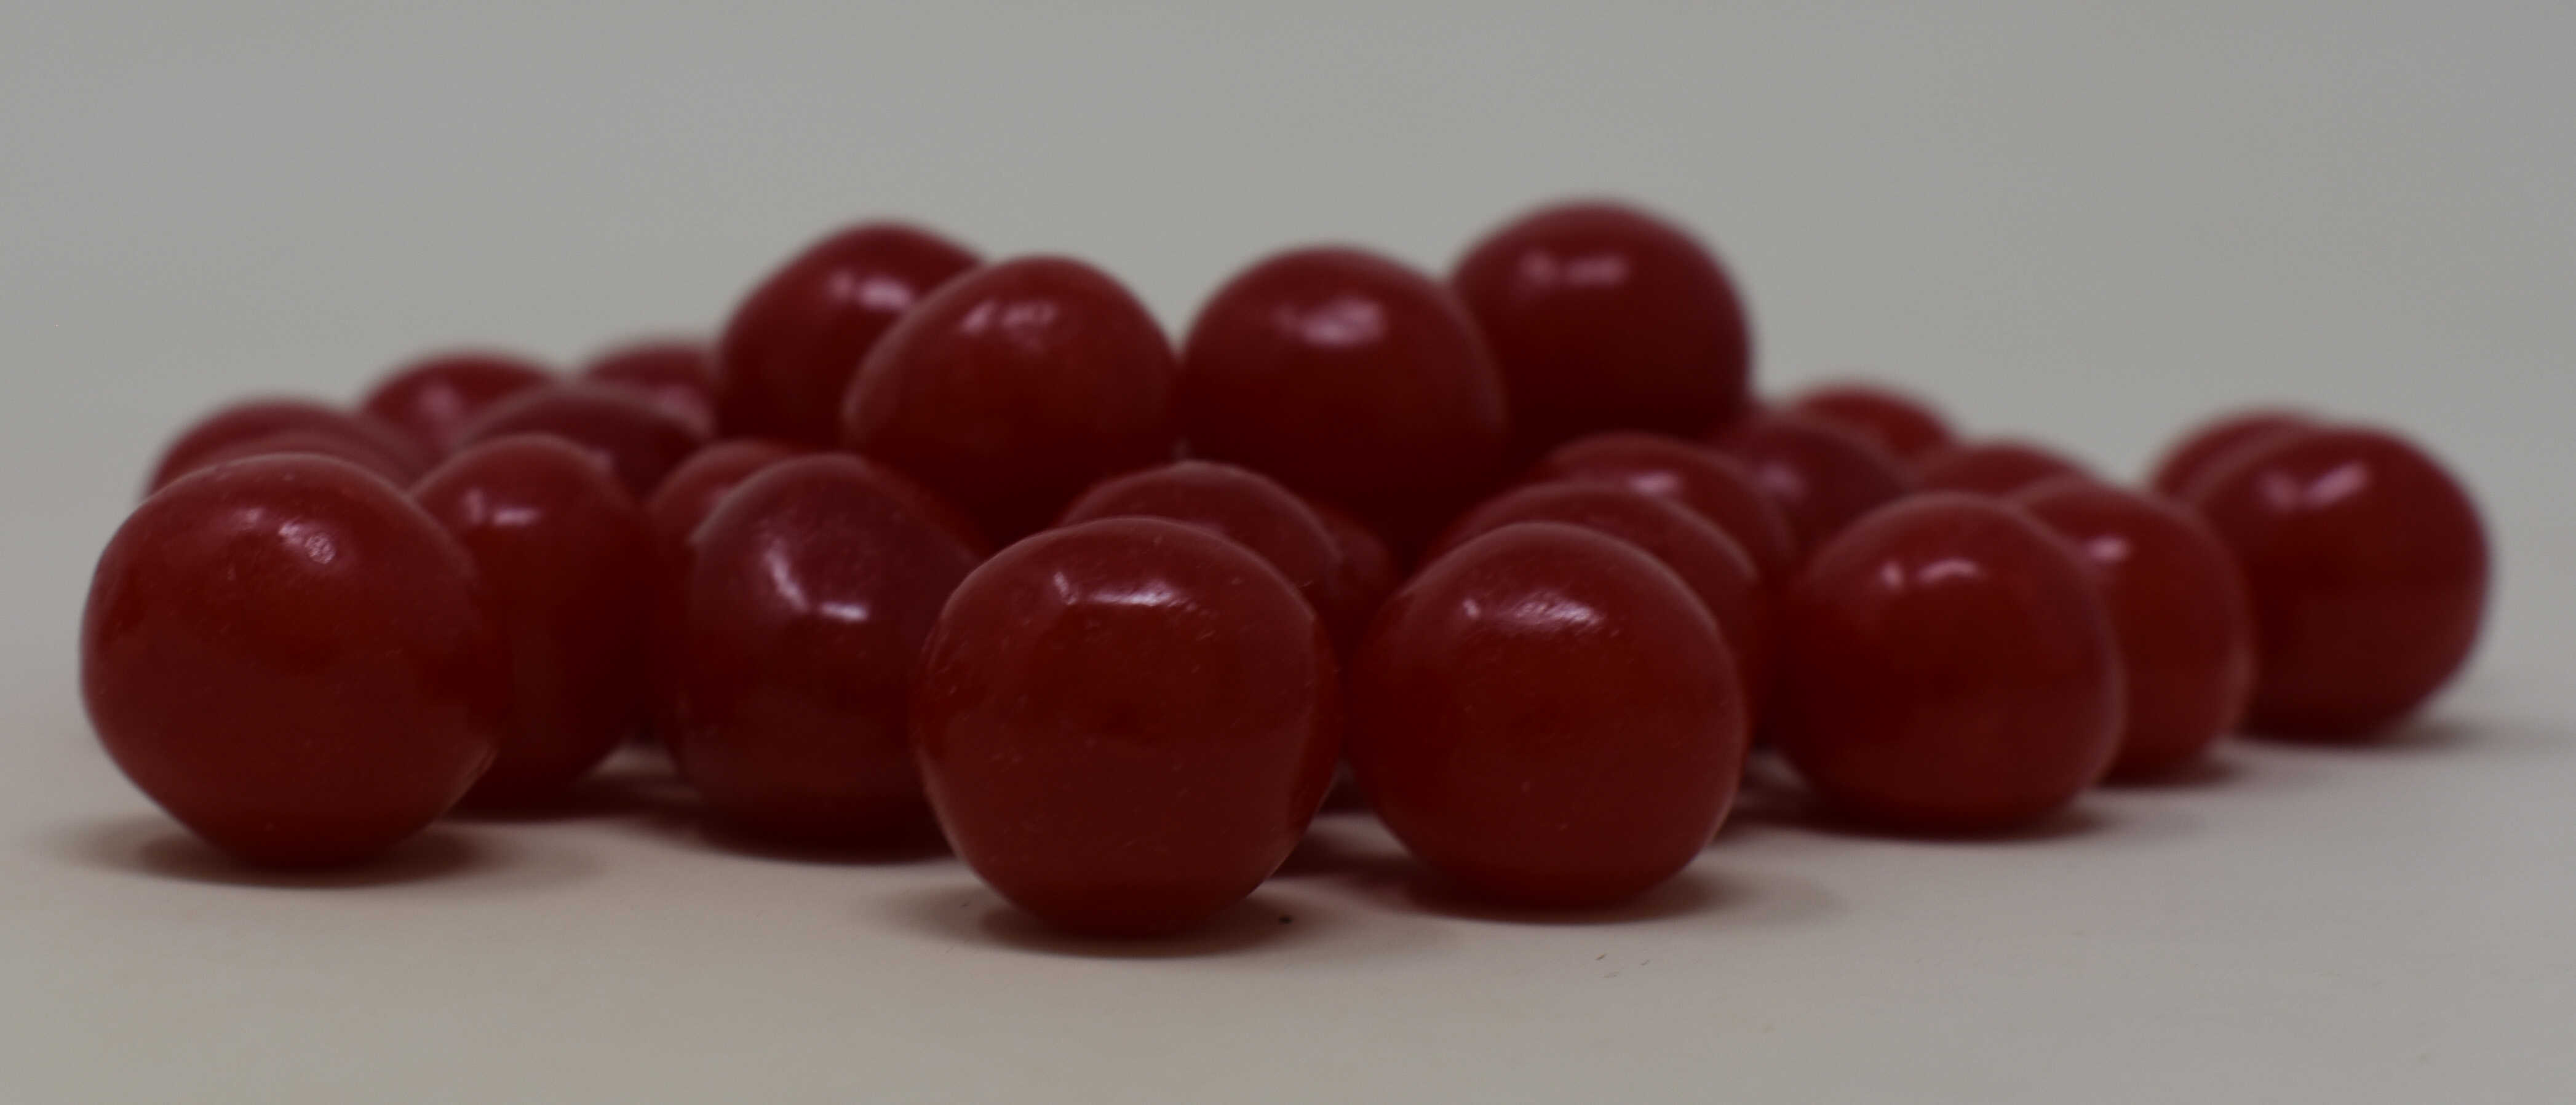 Cherry Sours - Side Photo